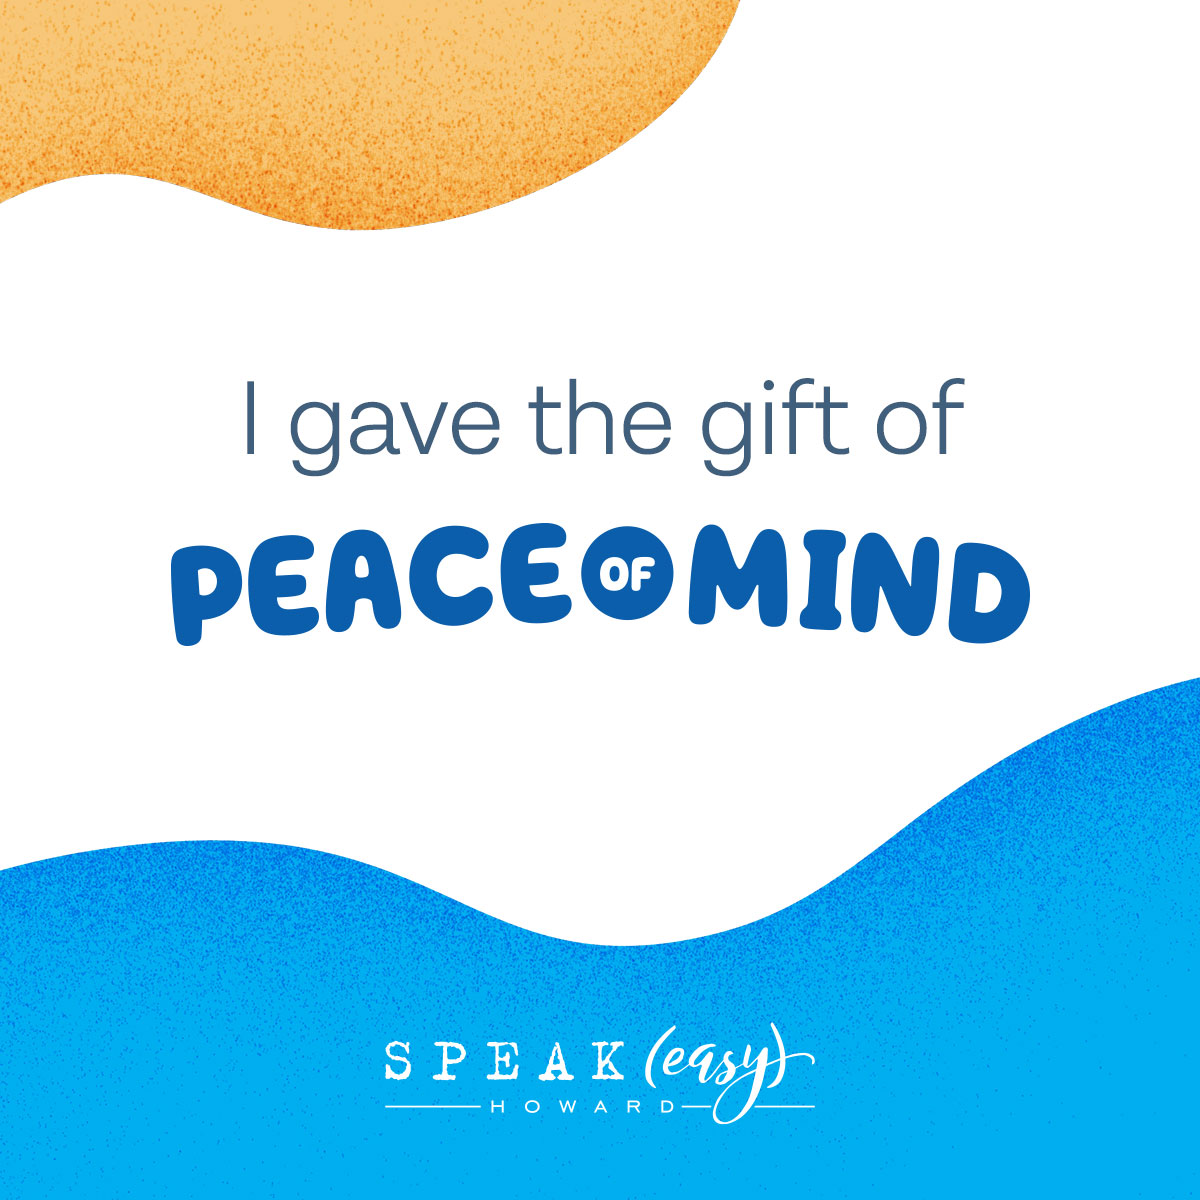 Another chance to give the gift of Peace of Mind